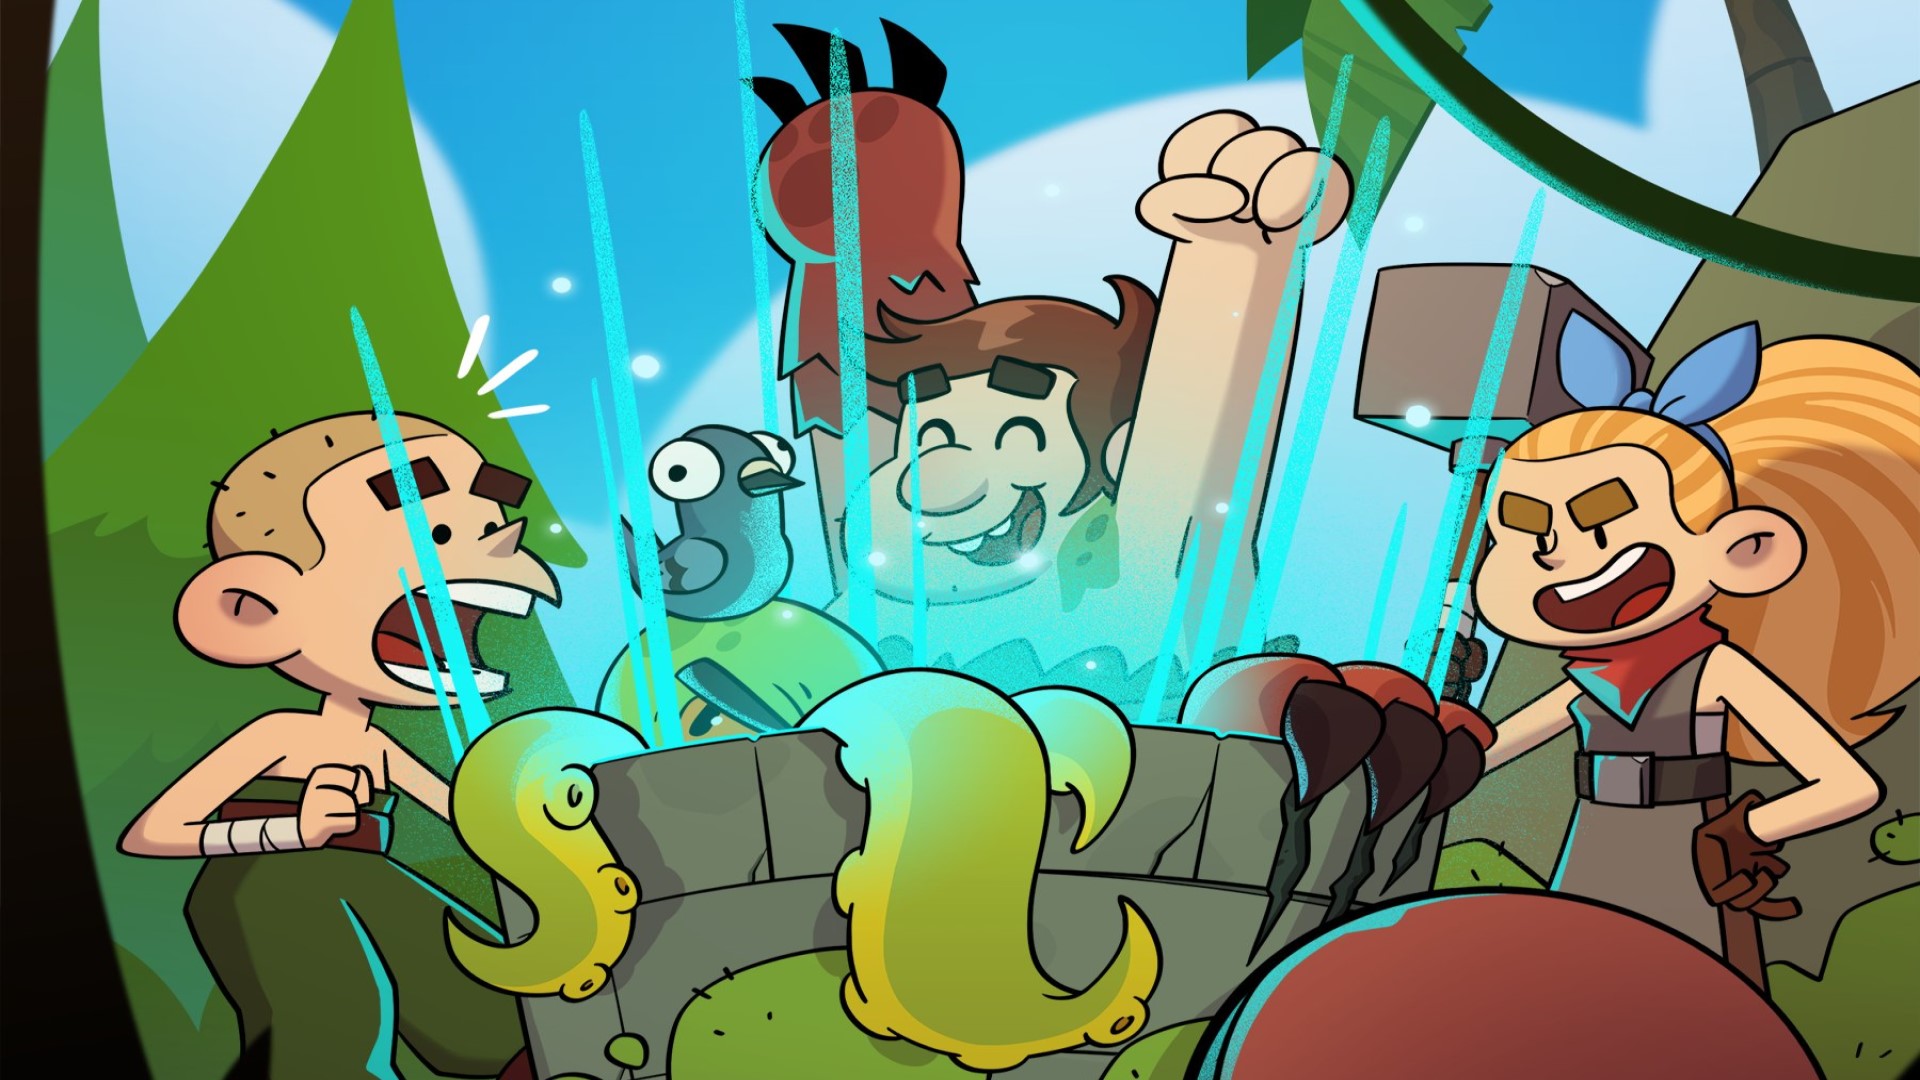 Best idle games: Almost a Hero. Image shows three people reacting with surprise as they look at a pot filled with a bird, an octopus and another clawed creature.